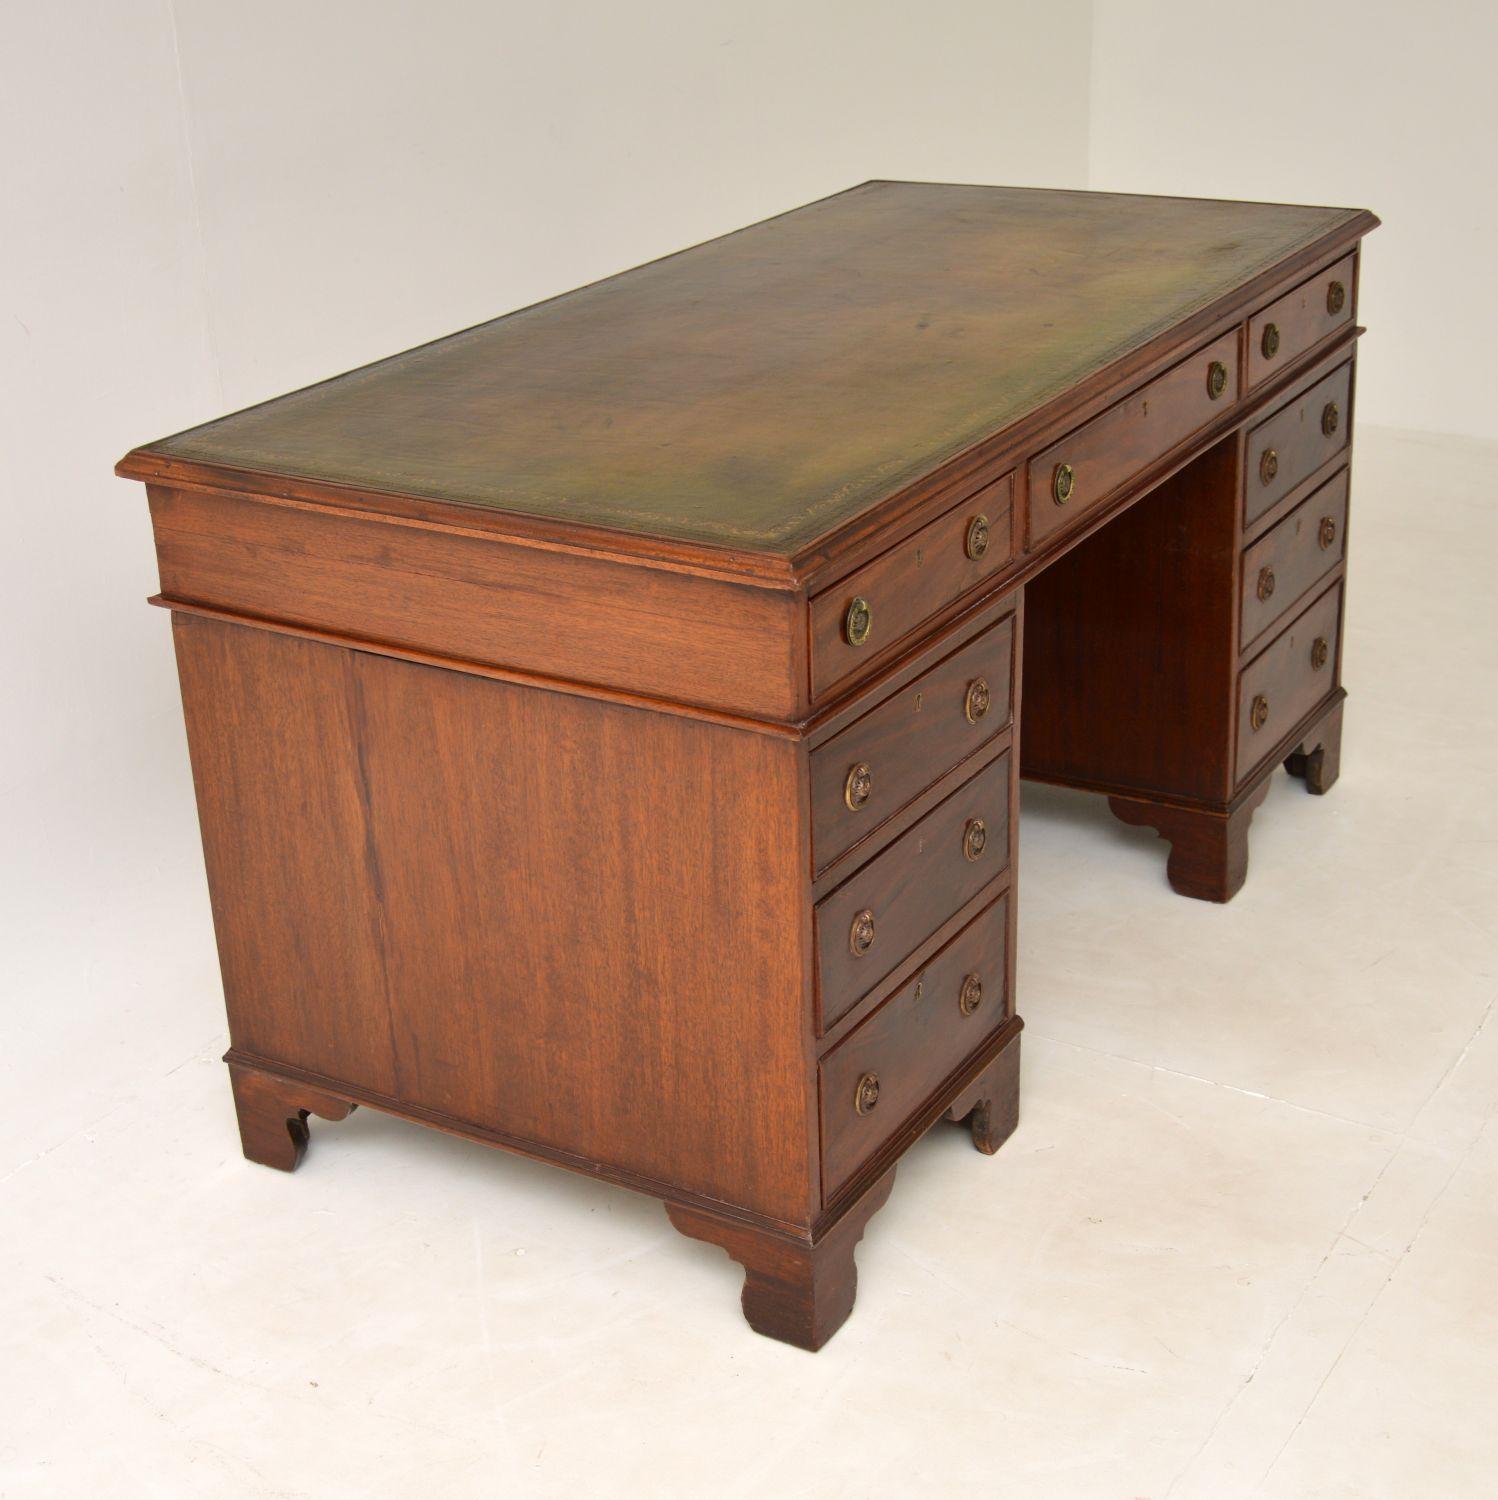 An excellent original antique wood pedestal desk with a generous sized kneehole space, which I would date from around the 1800-20 period.

The quality is superb, this is very well made and is a good size. There are gorgeous wood veneers on a solid